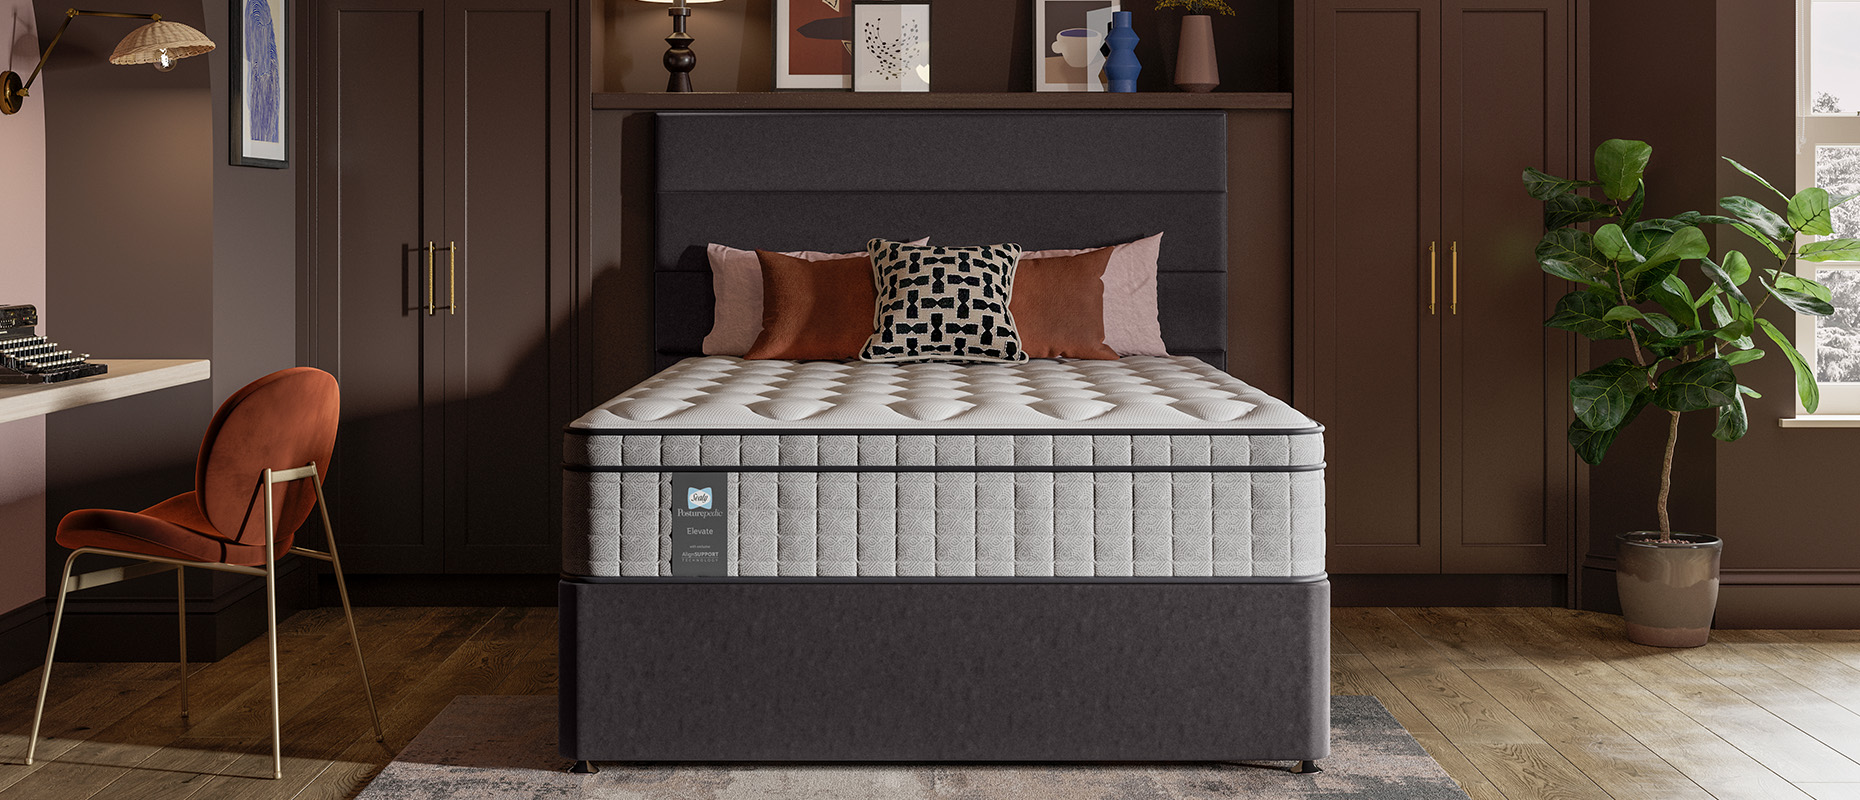 Frankel Medium Divan collection from Sealy at Forrest Furnishing